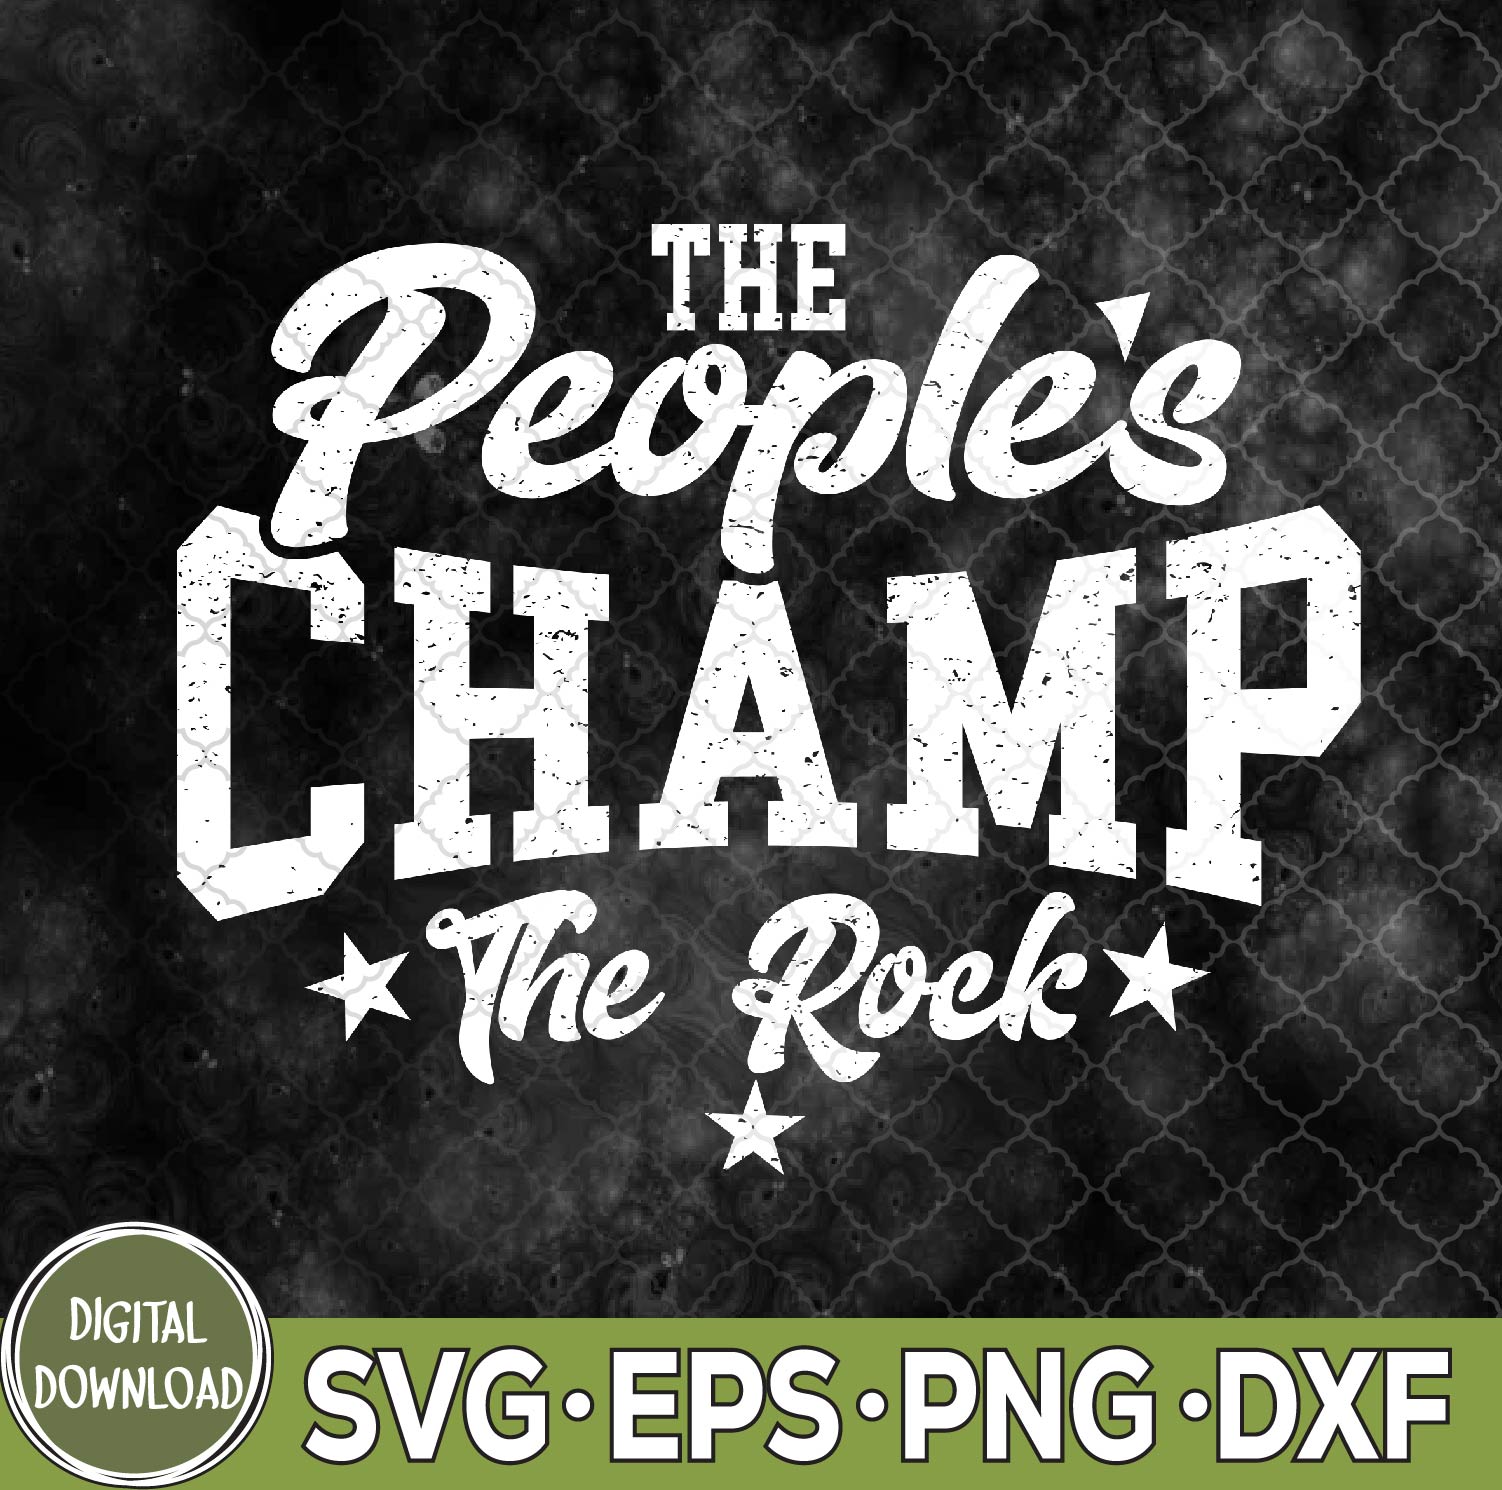 WTMNEW9file 09 87 The People's Champ The Rock Svg, Eps, Png, Dxf